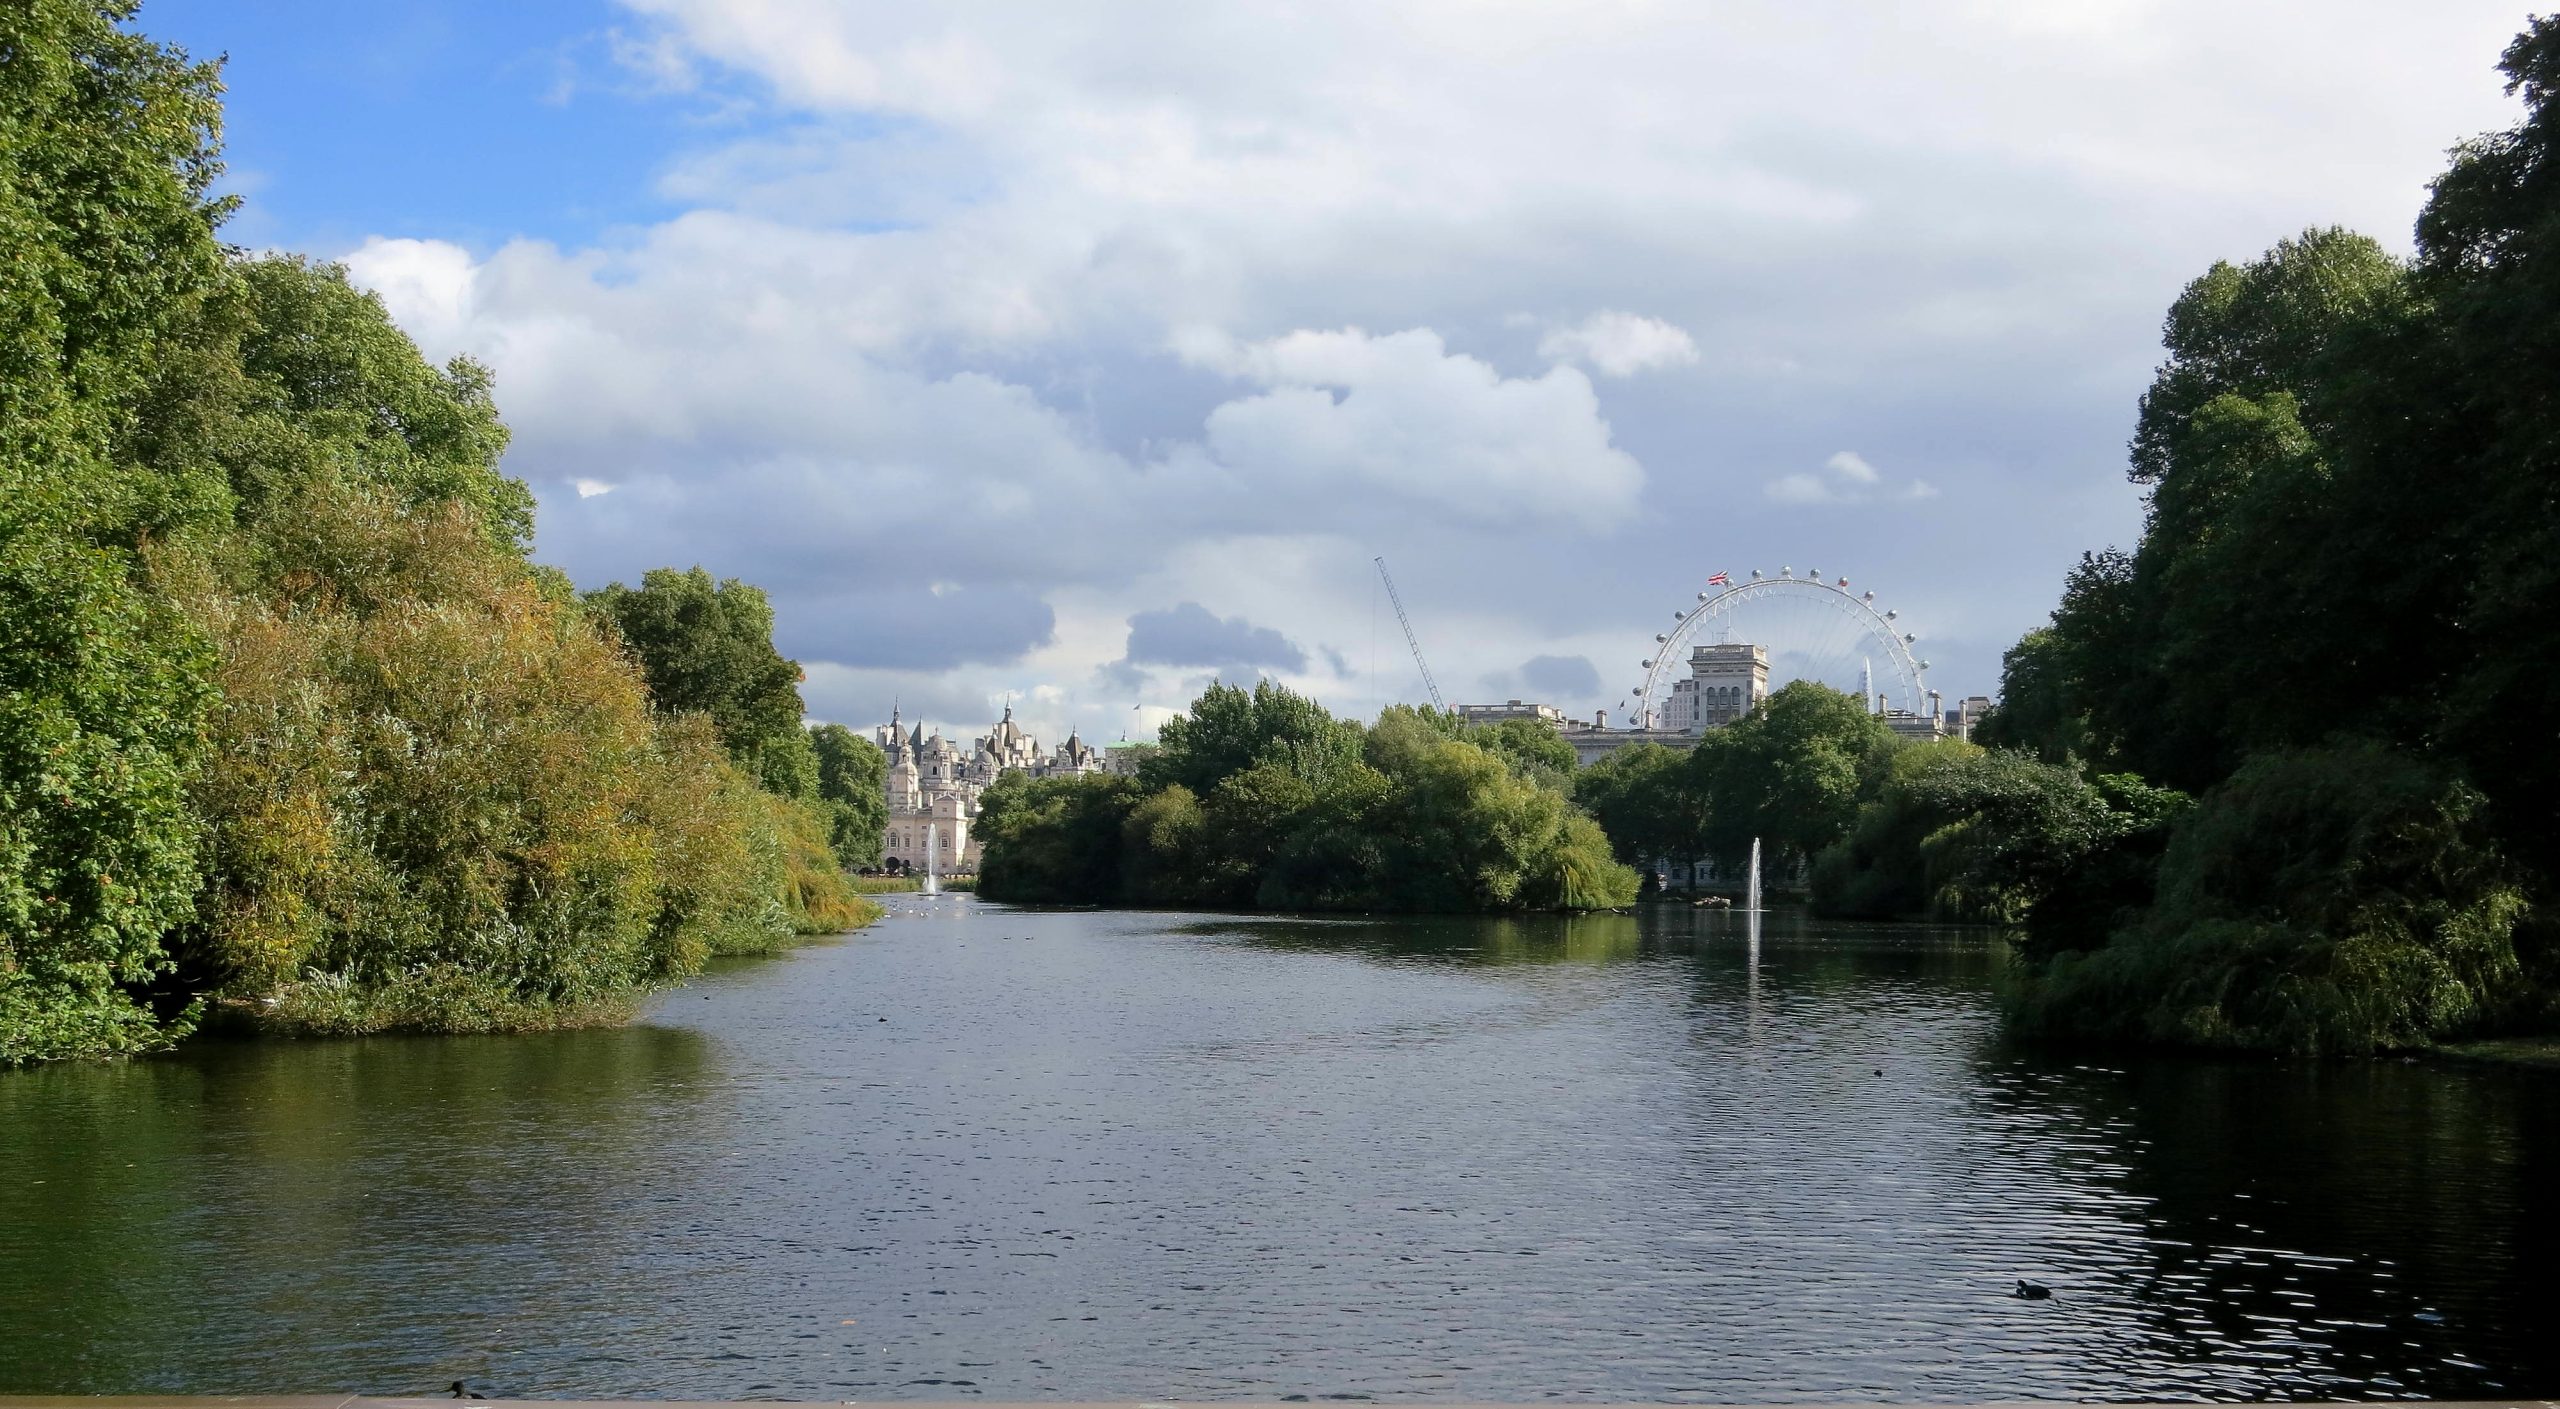 The London Eye from St. James's Park 9.12